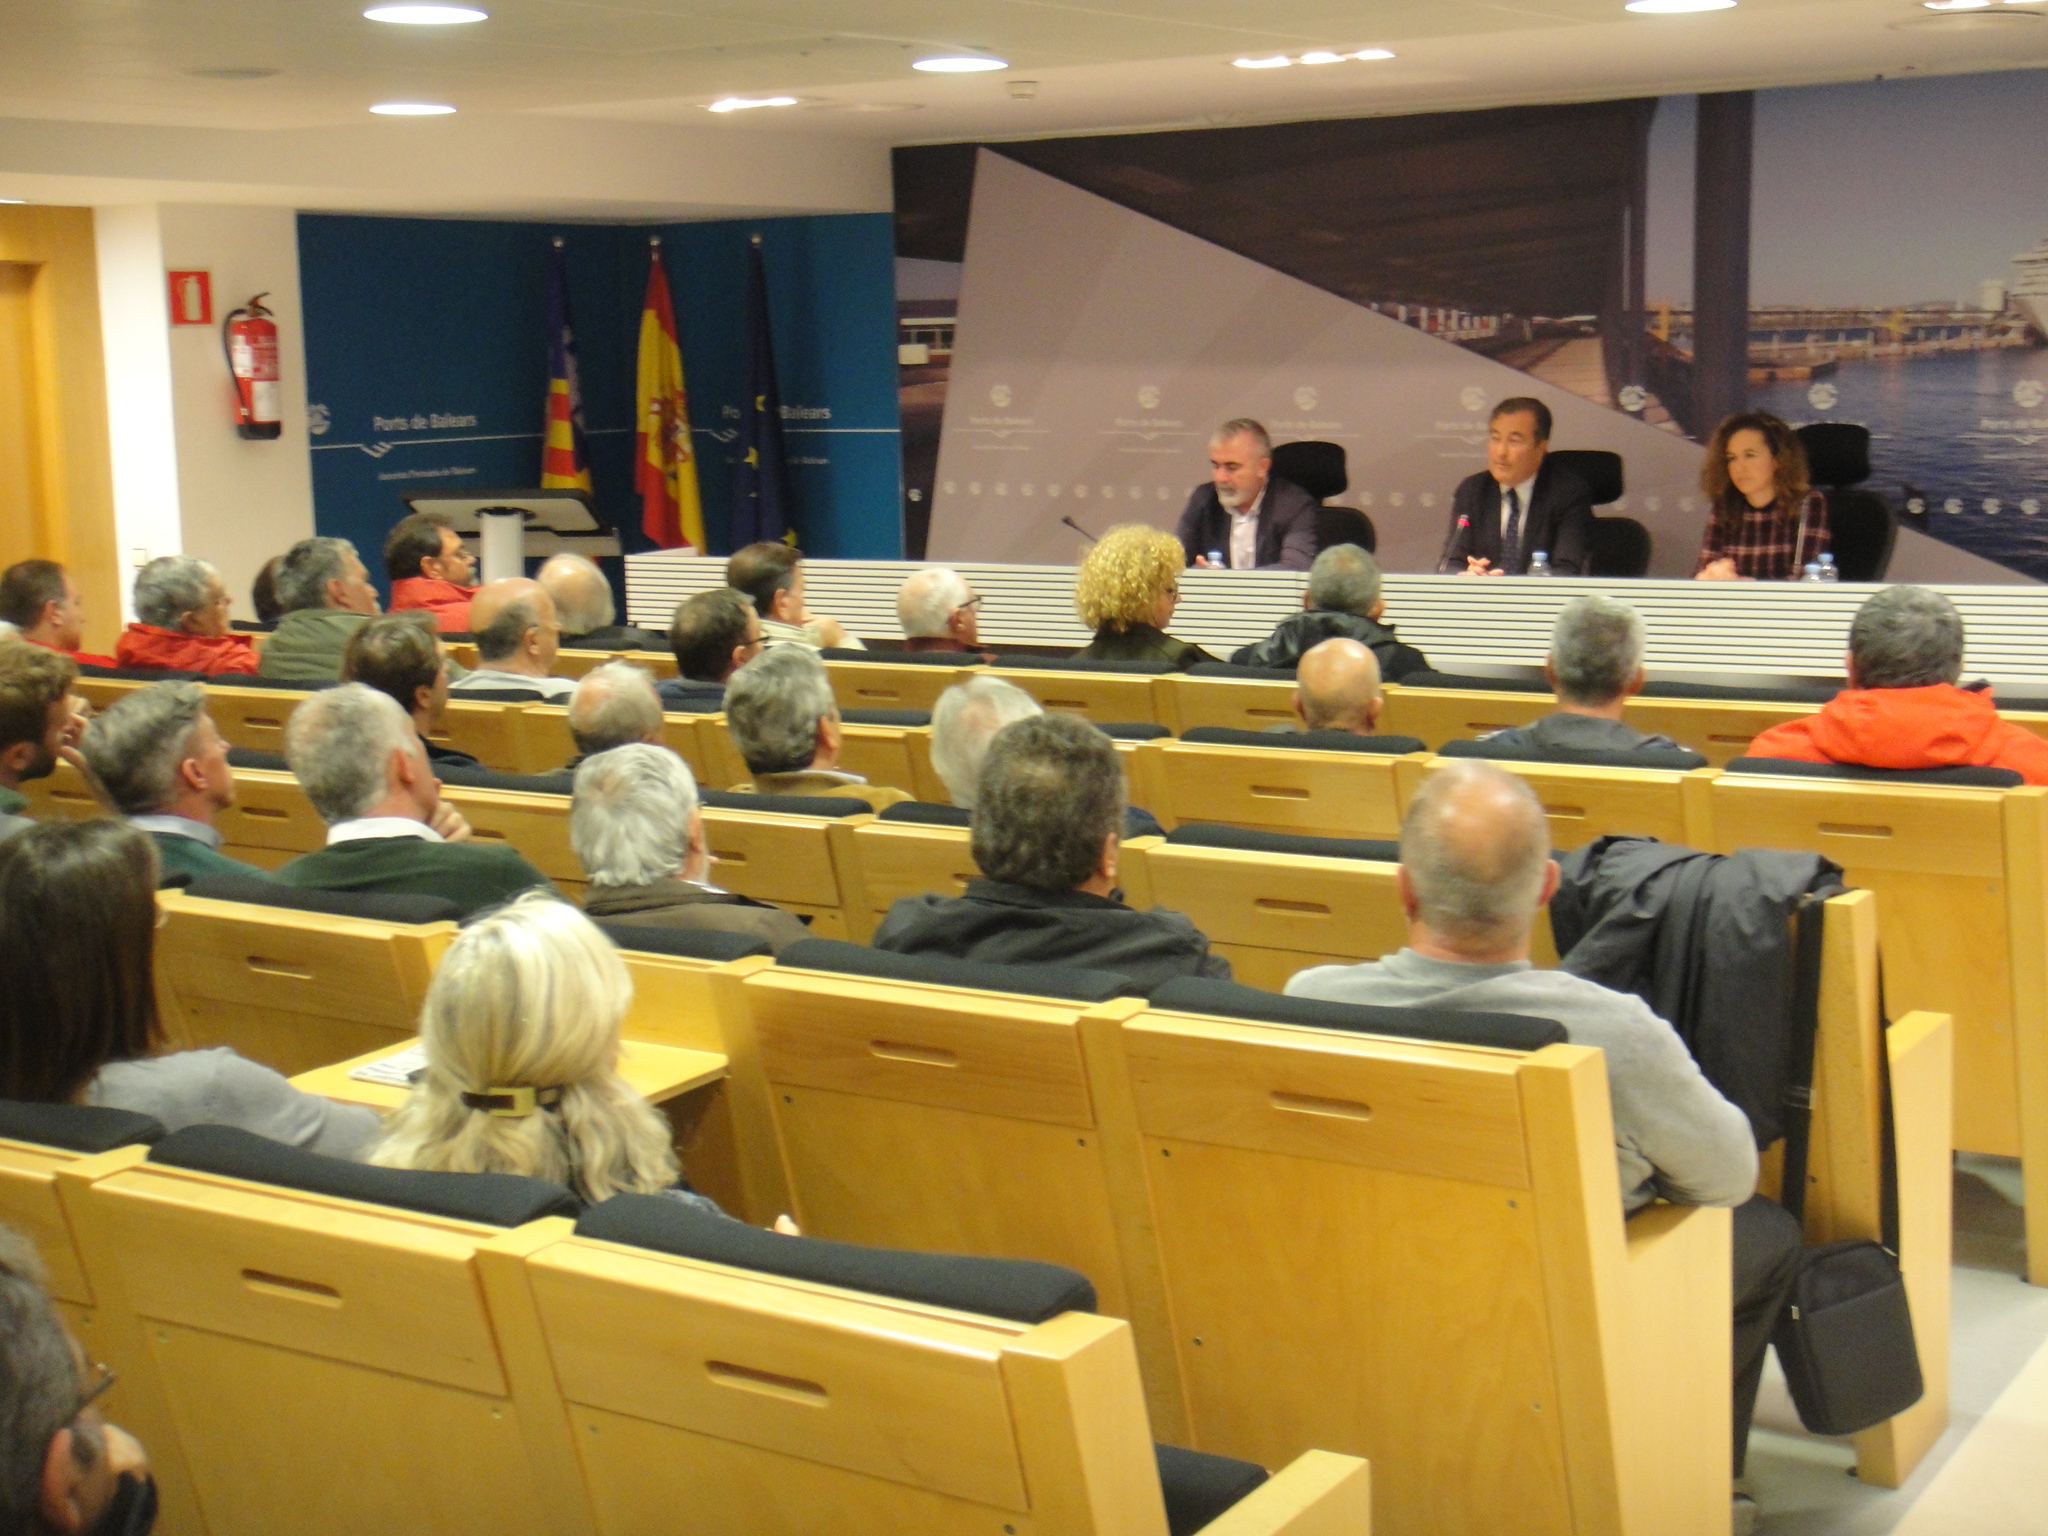 The APB is to accept a proposal by the Molinar de Levante Maritime Club to submit a new project in order to continue its concession